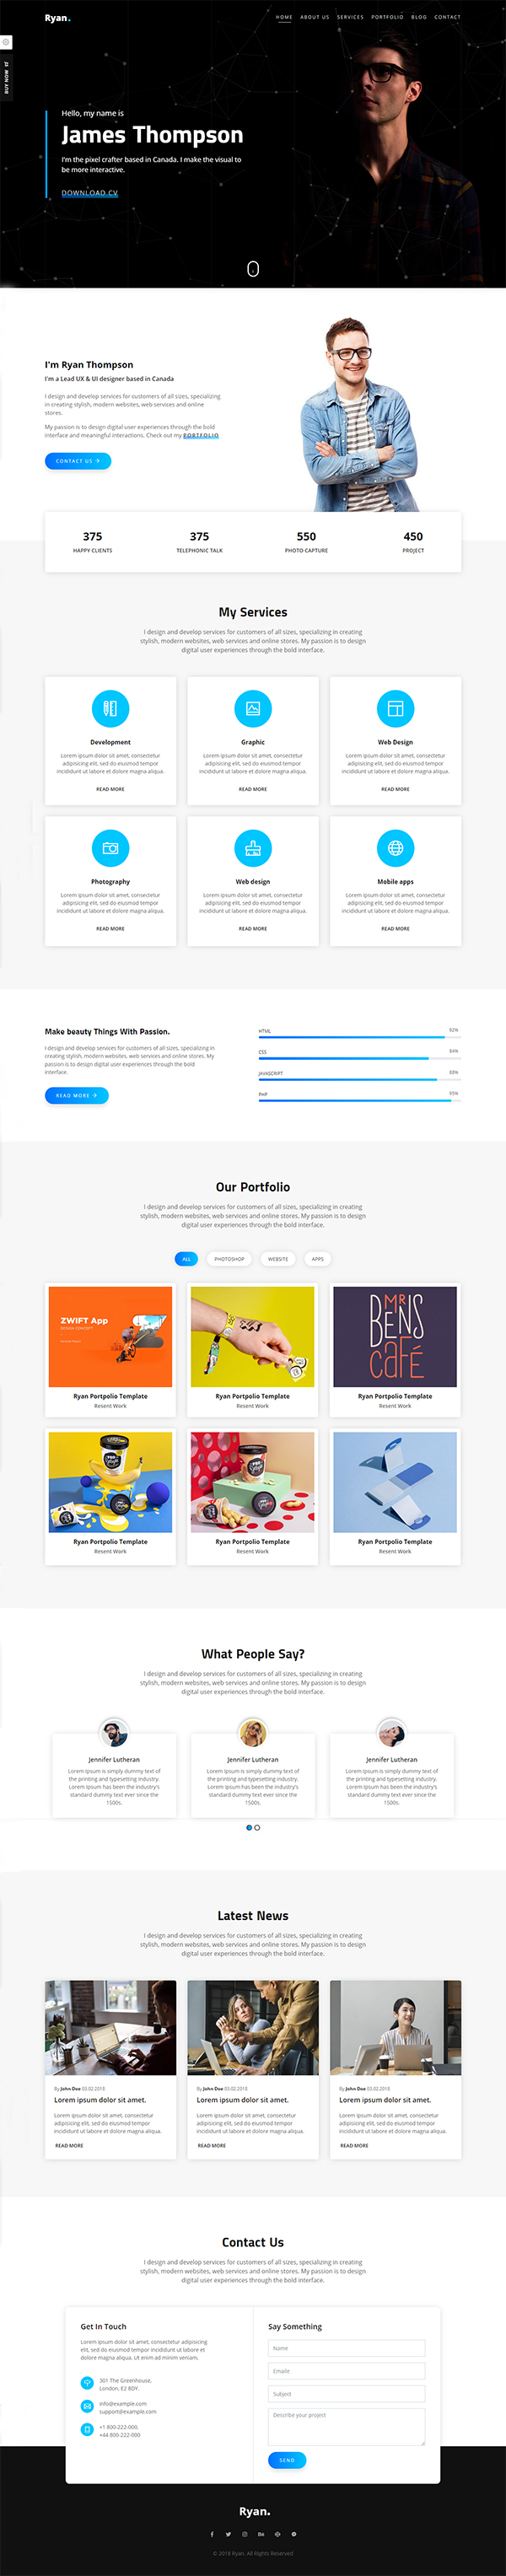 Ryan – Bootstrap 4 One Page Personal Portfolio Template